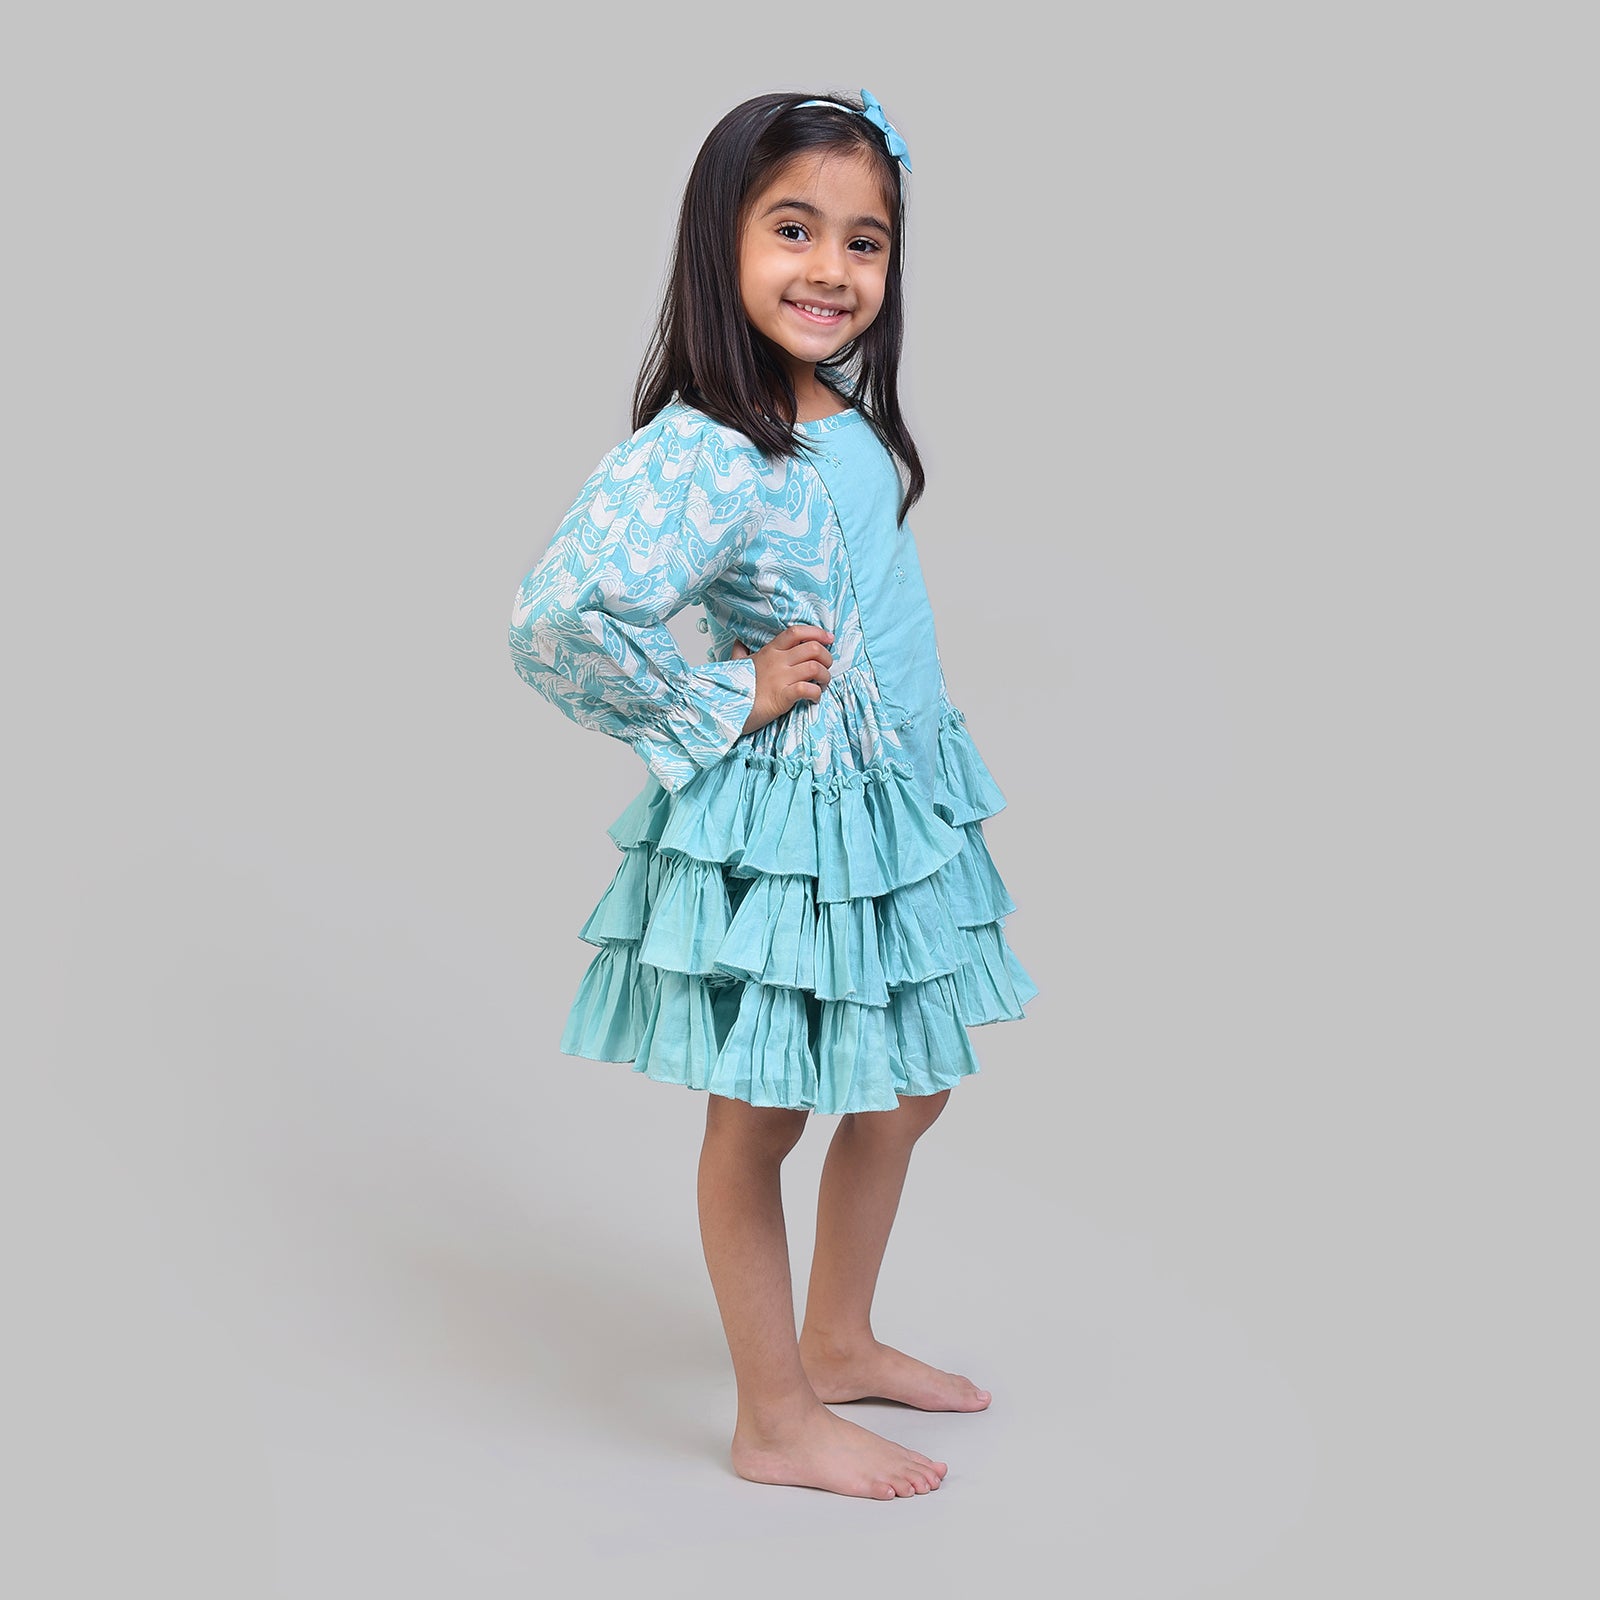 Cotton Gathered Party Frock For Girls with The Talkative Turtle Print